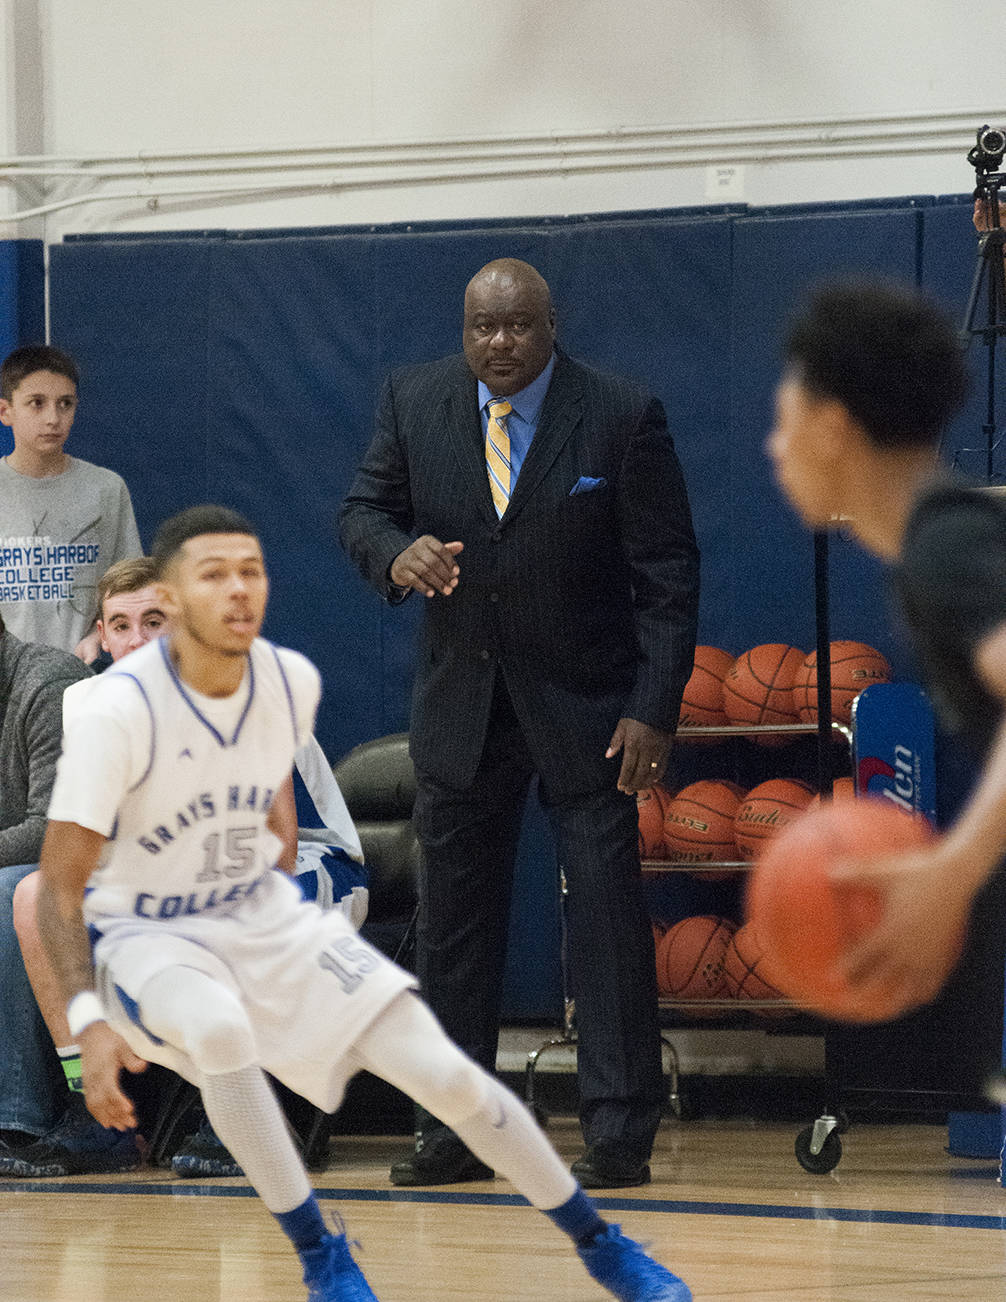 Cole fired by Grays Harbor College